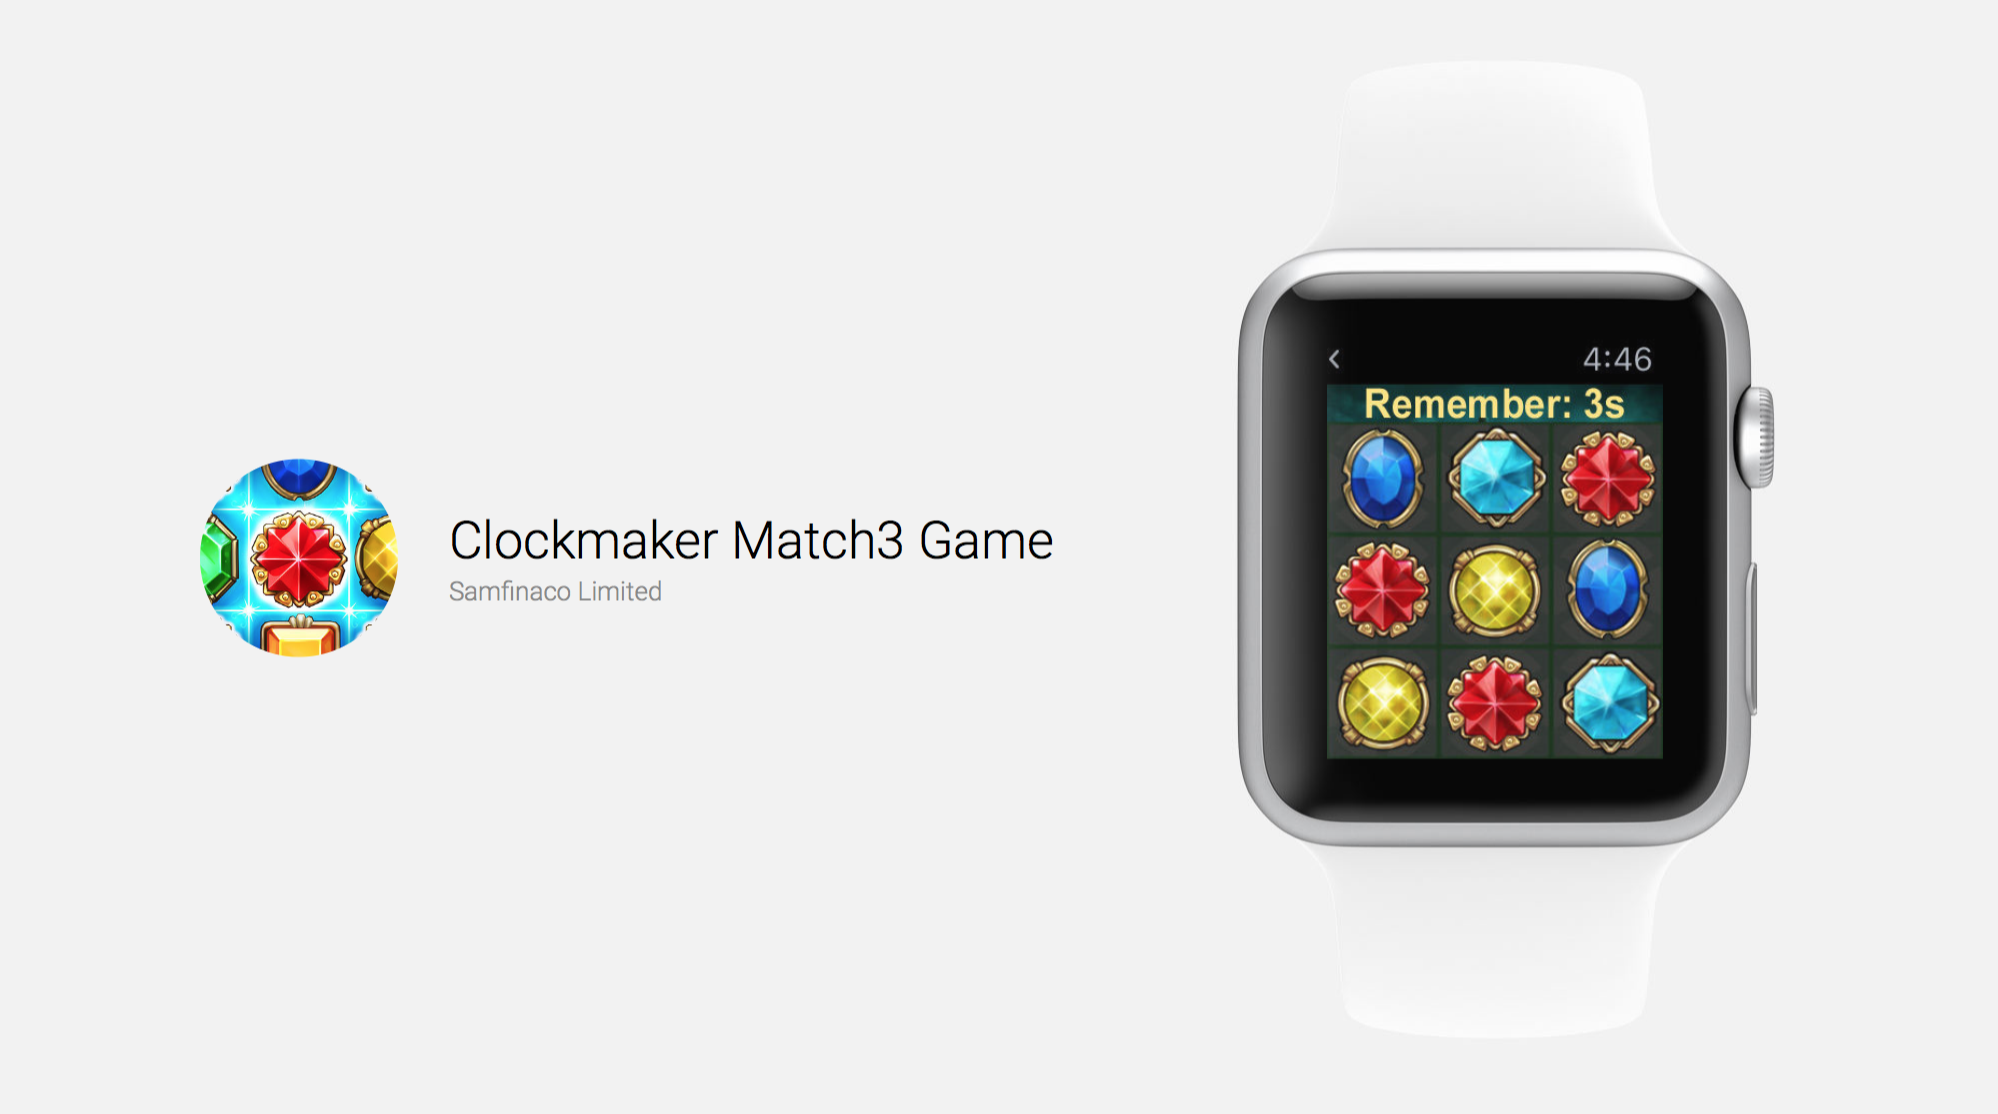 Clockmaker Match3 Game is a Memory Game on the Apple Watch